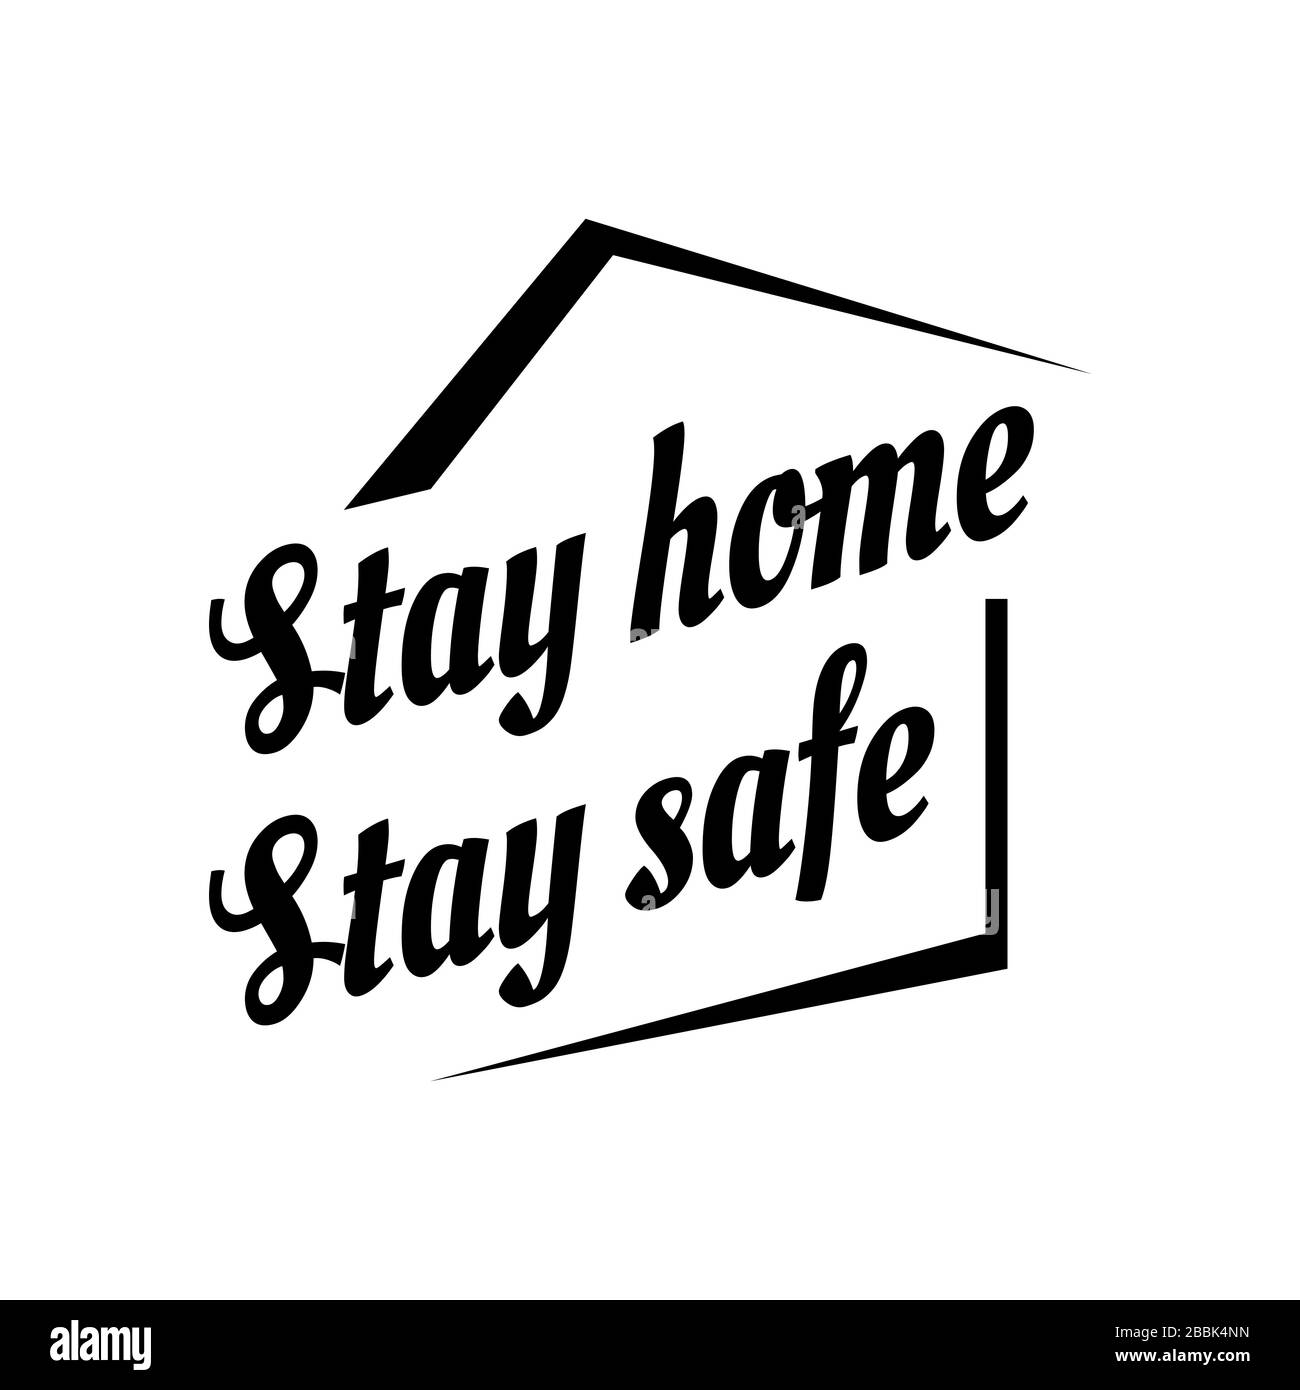 stay home stay safe Lettering Typography logo design save campaign vector illustration Stock Vector